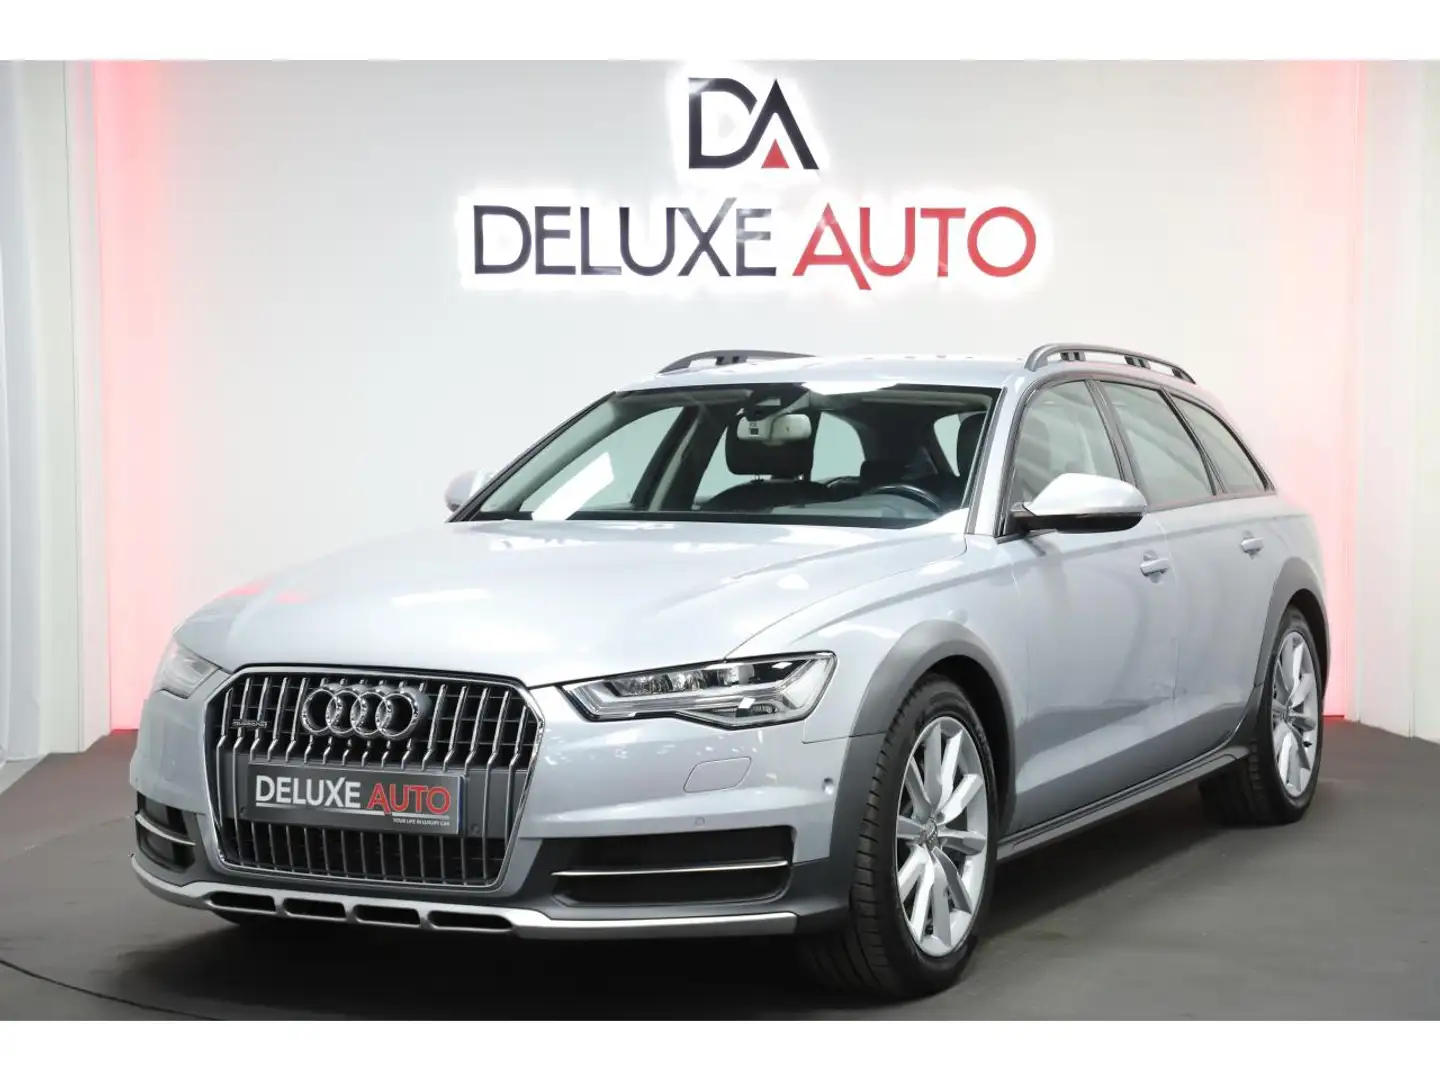 Audi A6 allroad 3.0 V6 272 Quattro Ambition Luxe S-tronic Phase 2 siva - 1